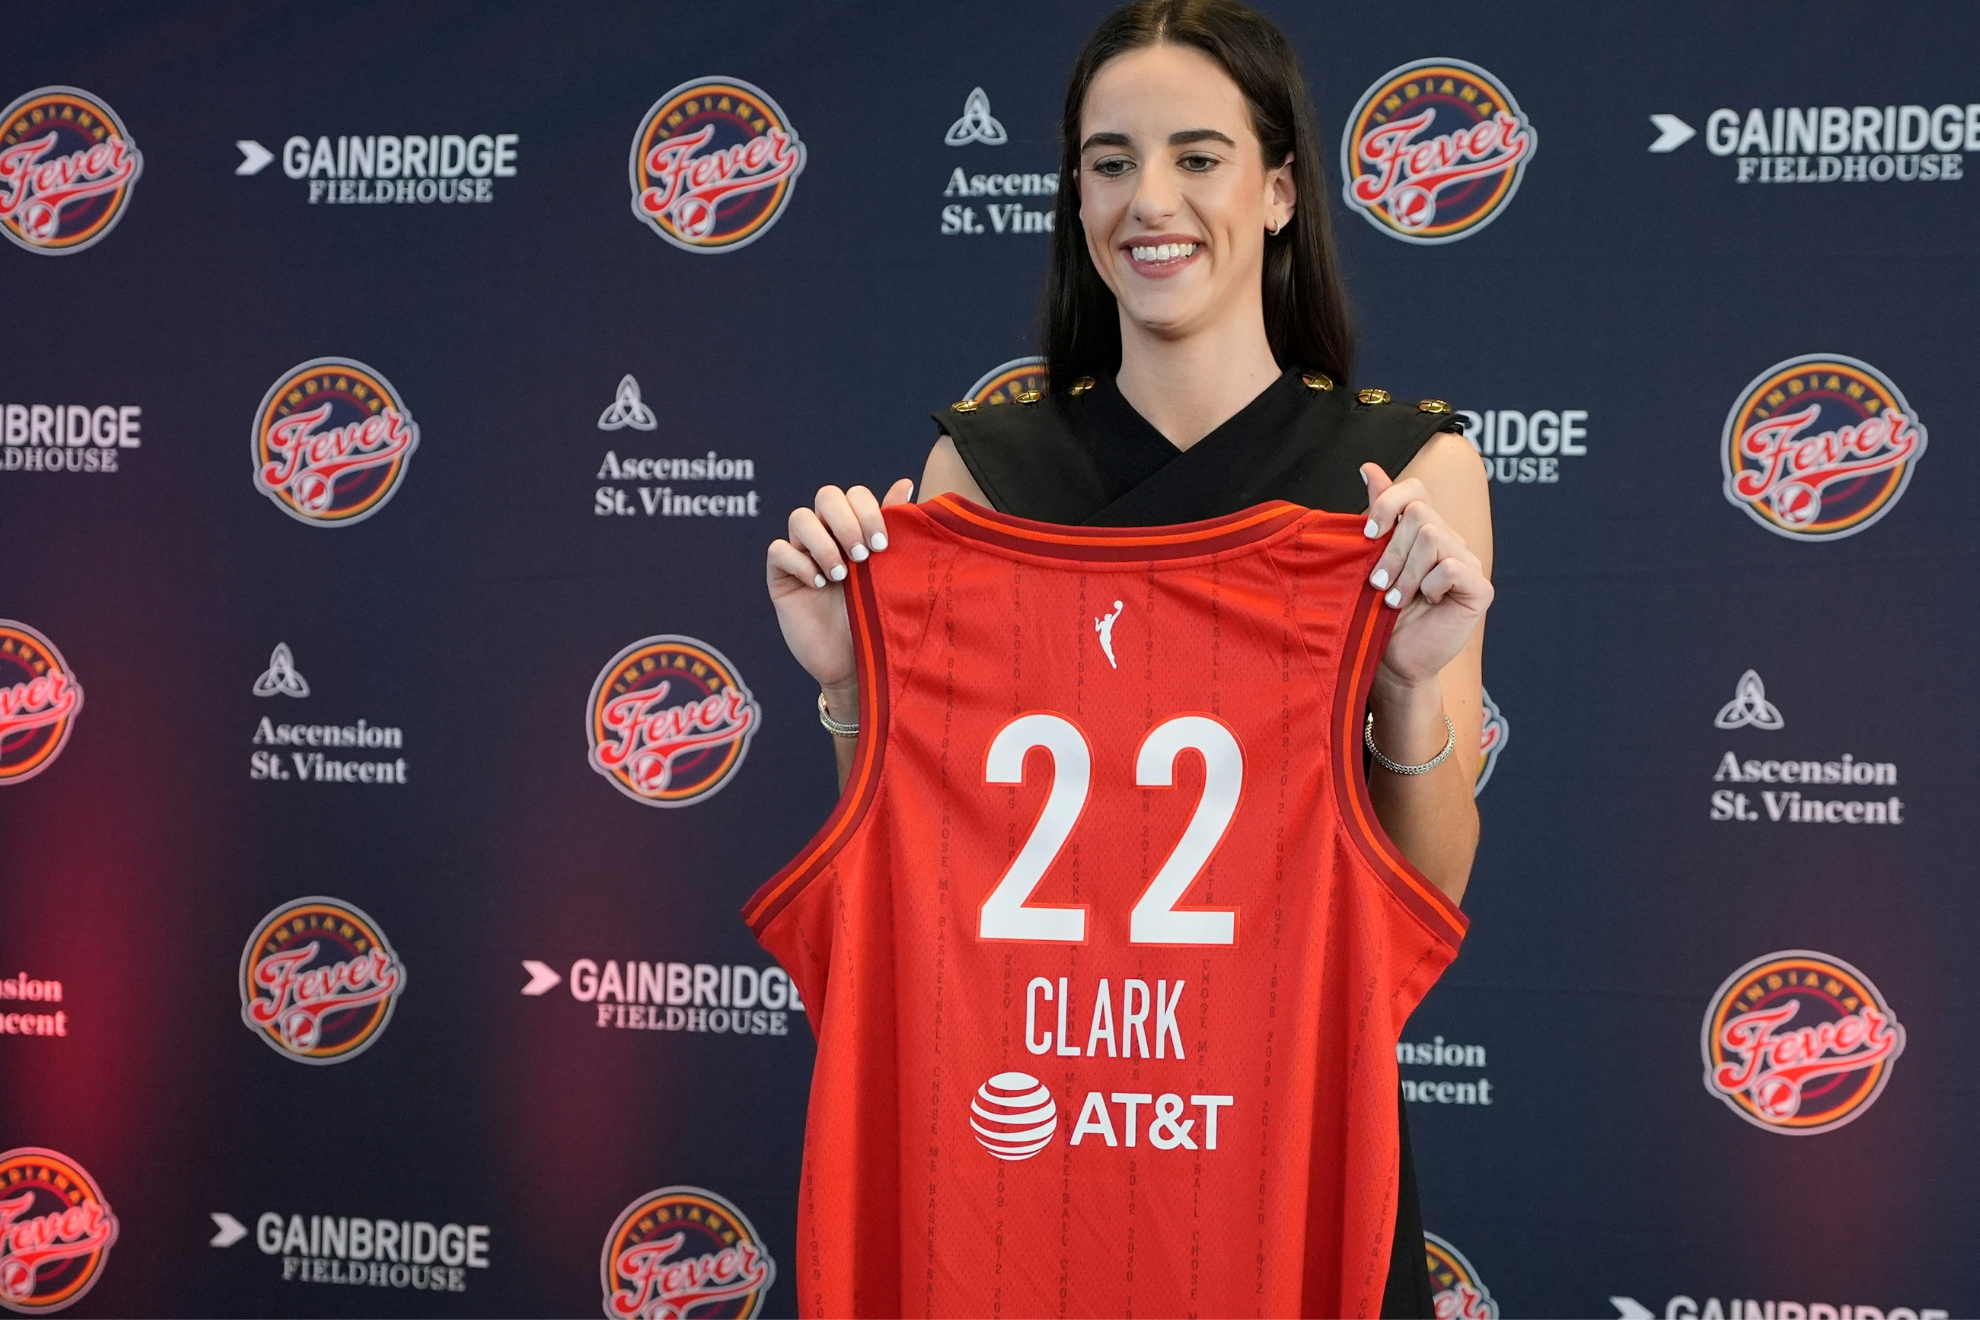 Caitlin Clark pulls ahead of Angel Reese in WNBA fan acceptance reflected in jersey sales